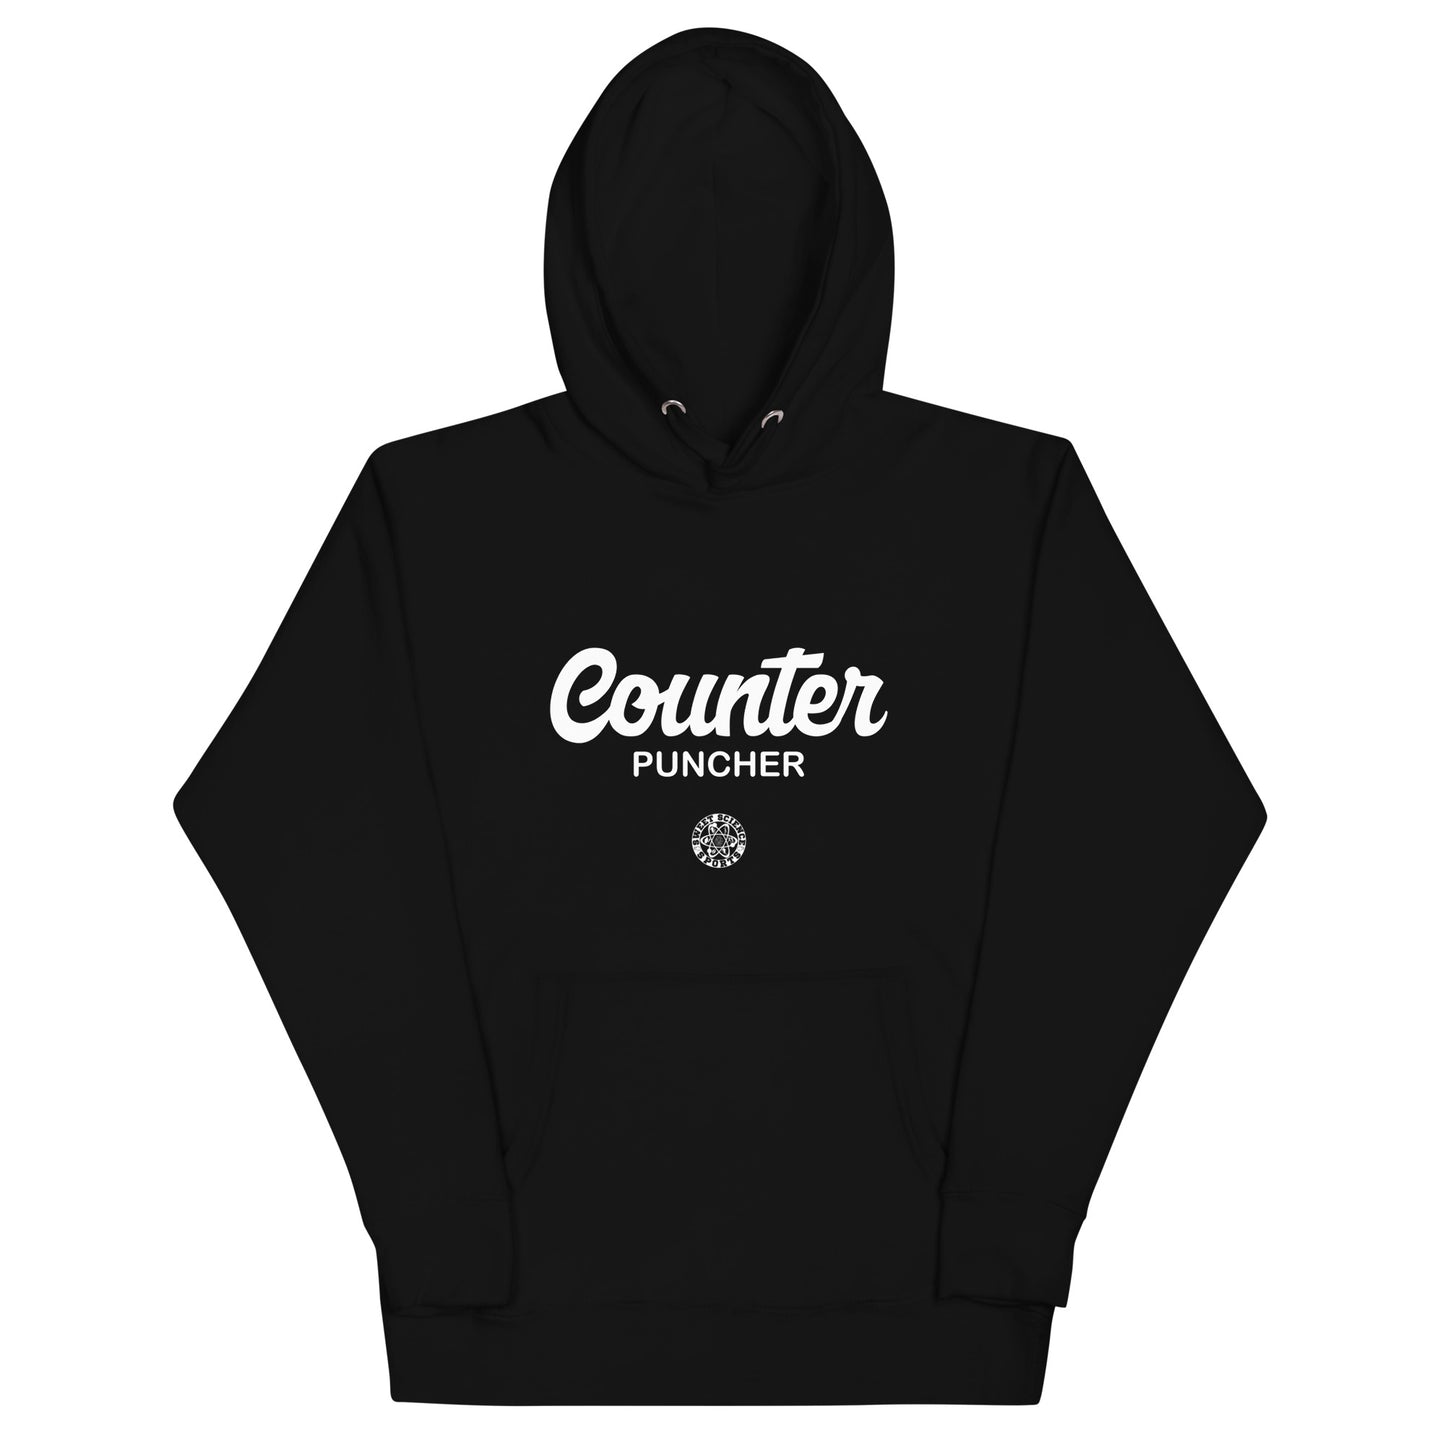 Sweet Science Sports Counter Puncher  Hoodie